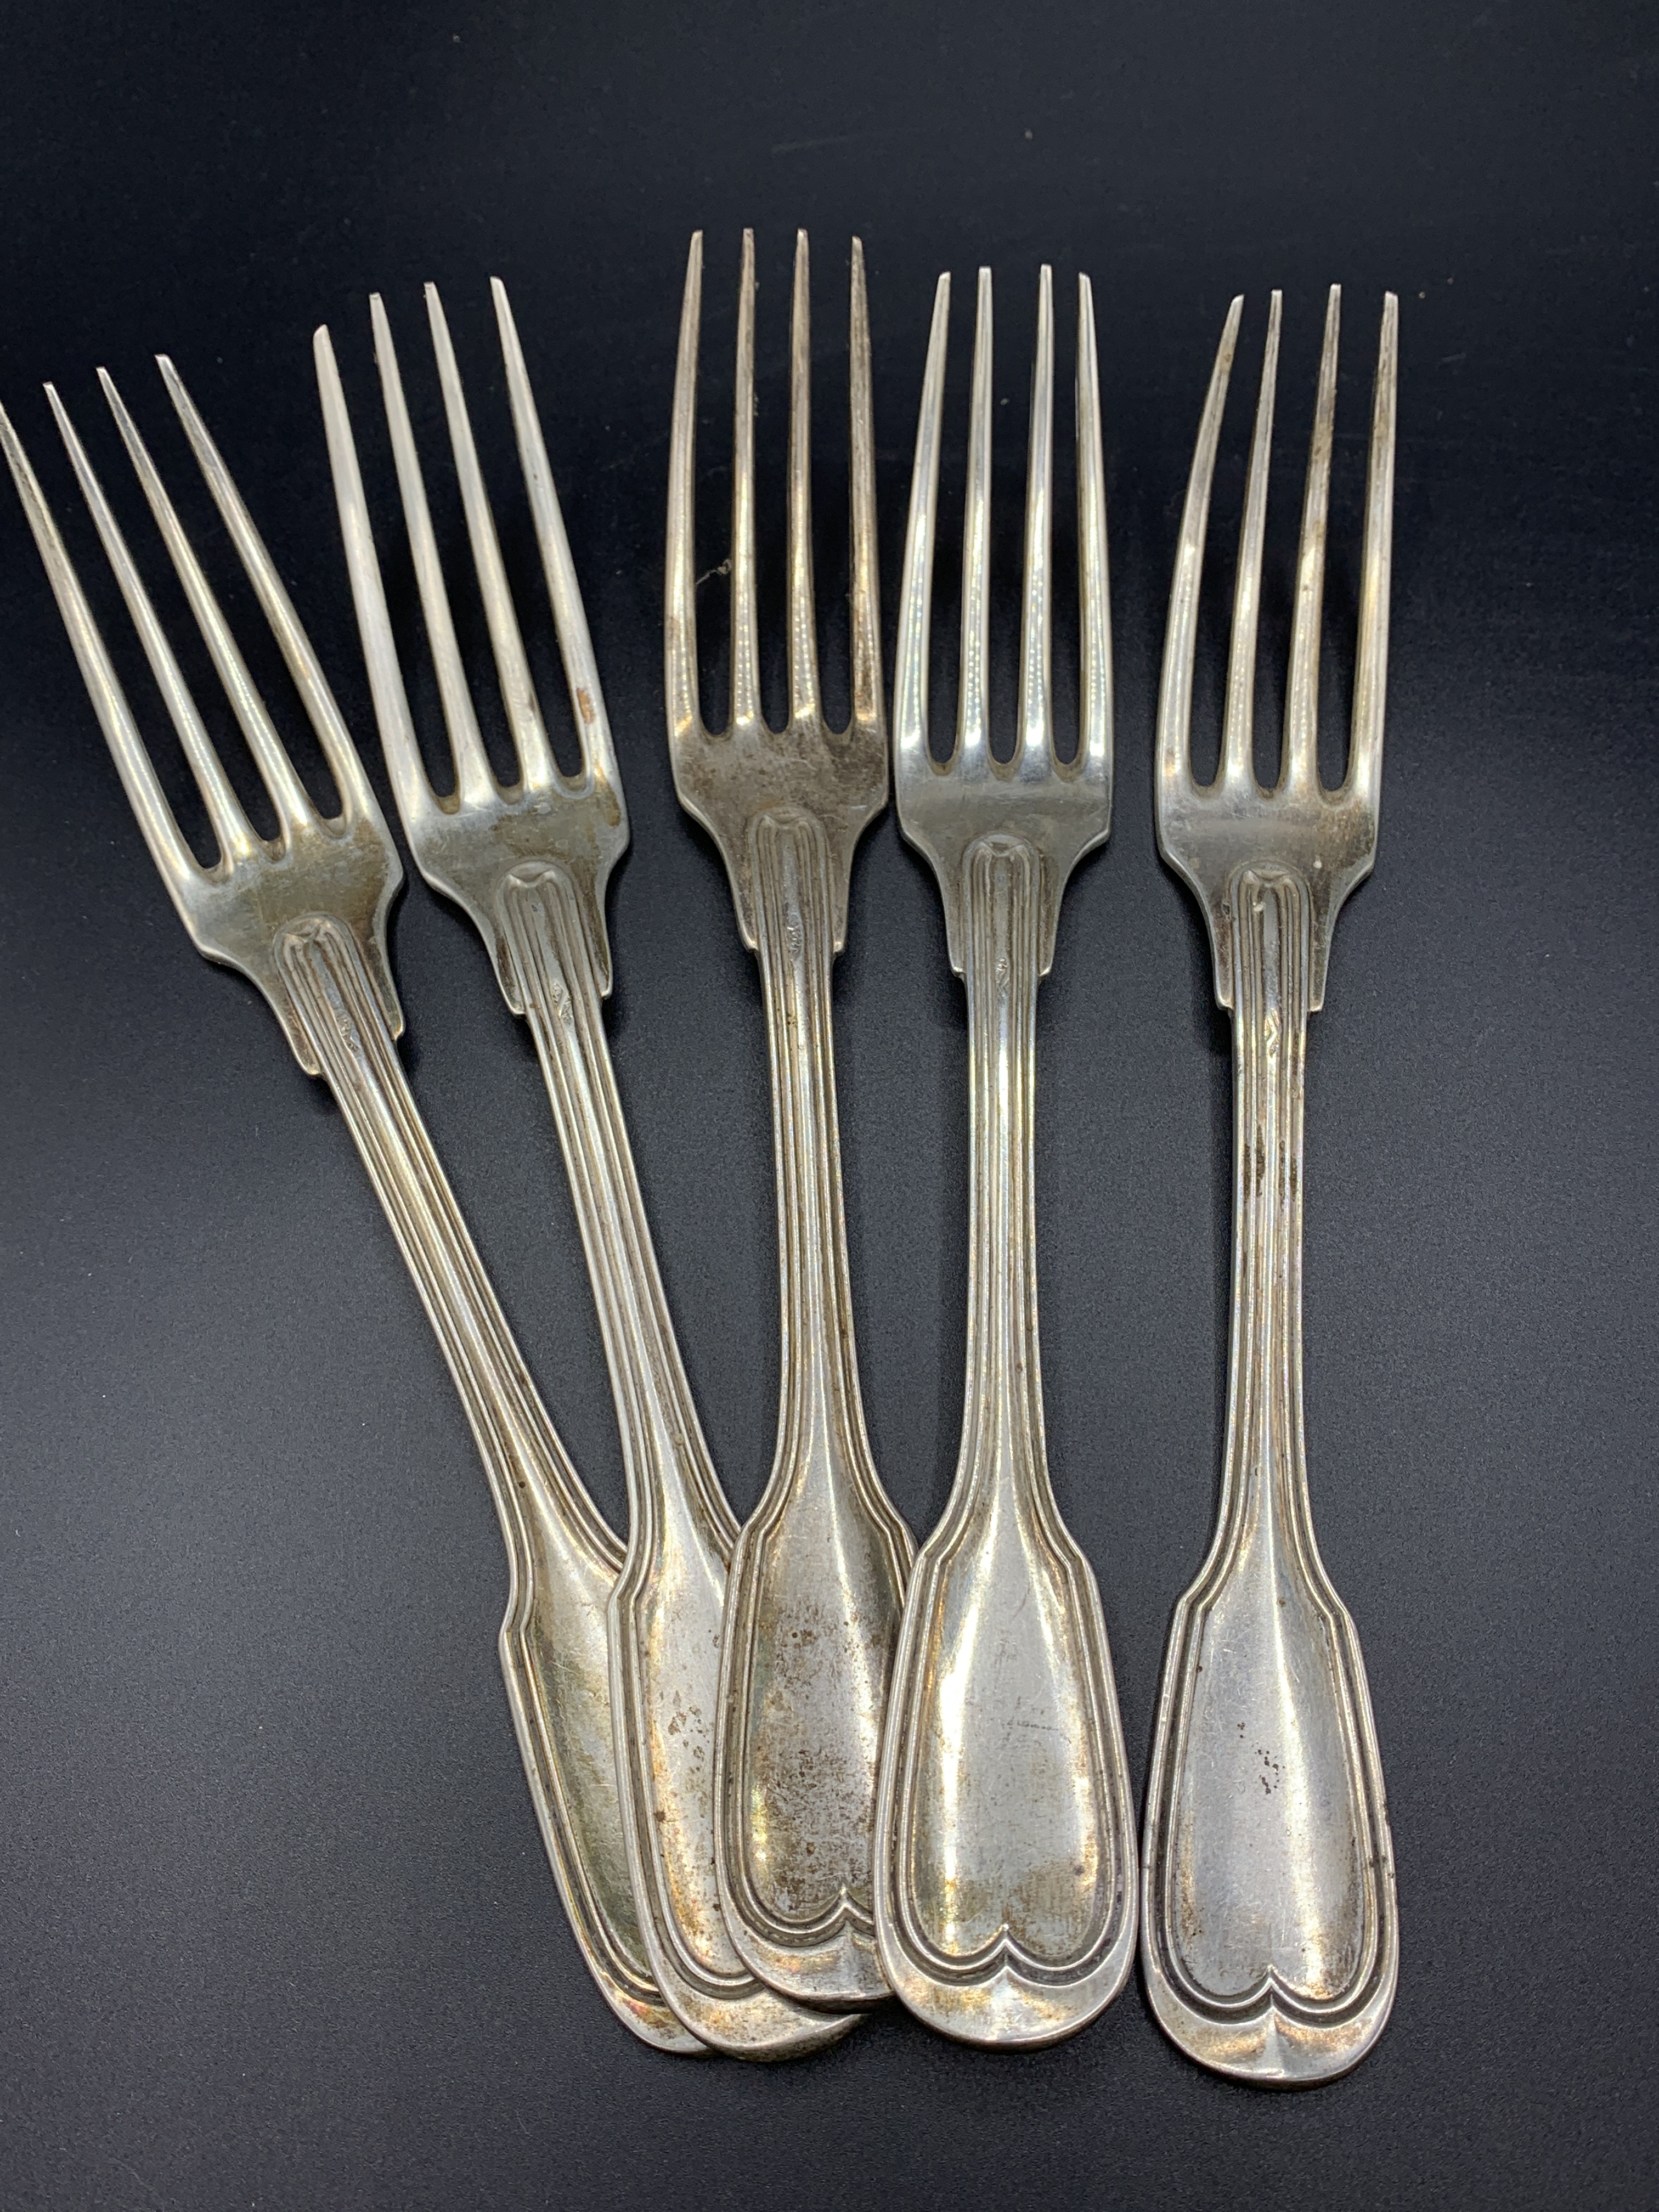 Five large French 800 silver forks - Image 2 of 4